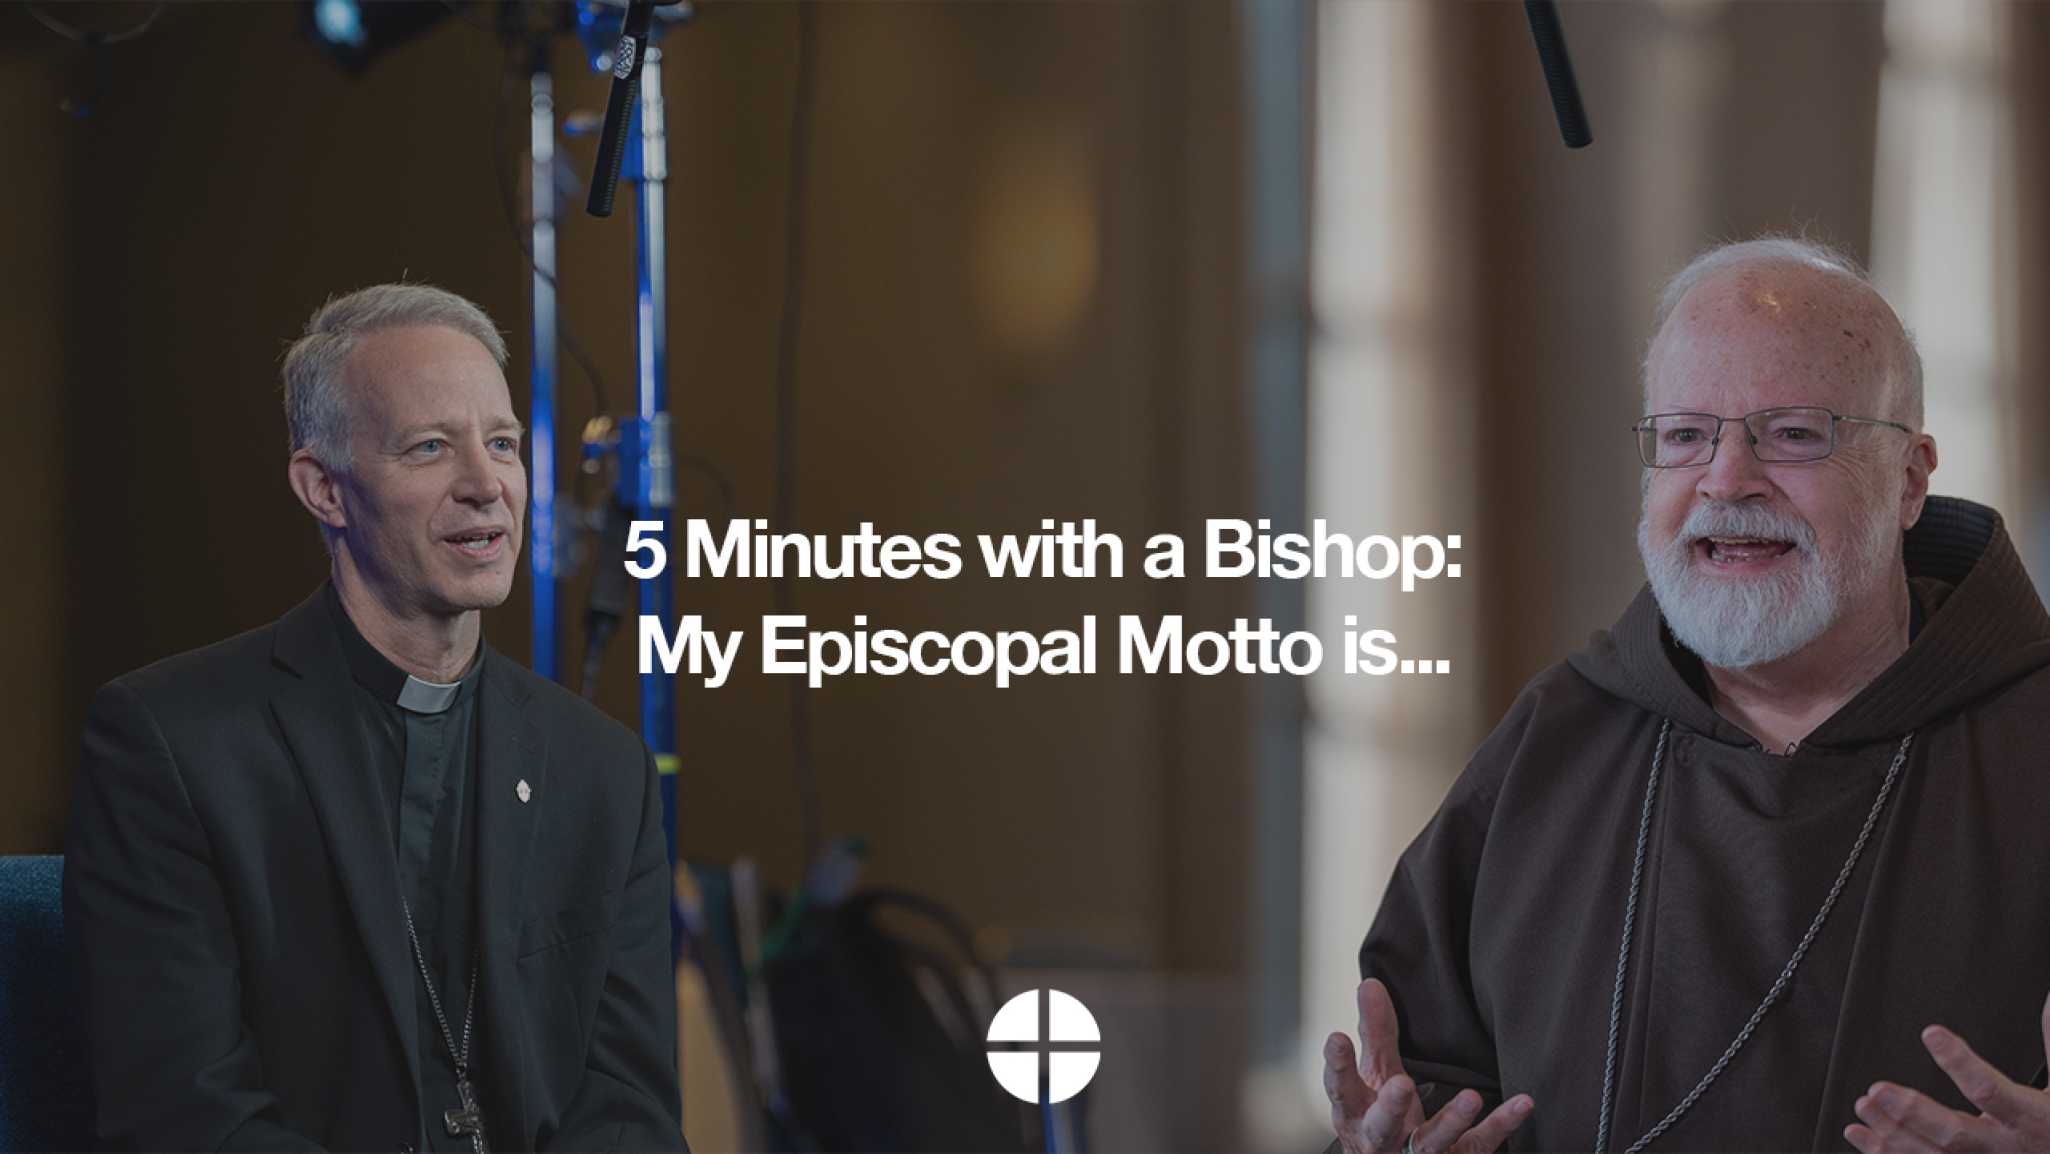 5 Minutes with a Bishop: My Episcopal Motto